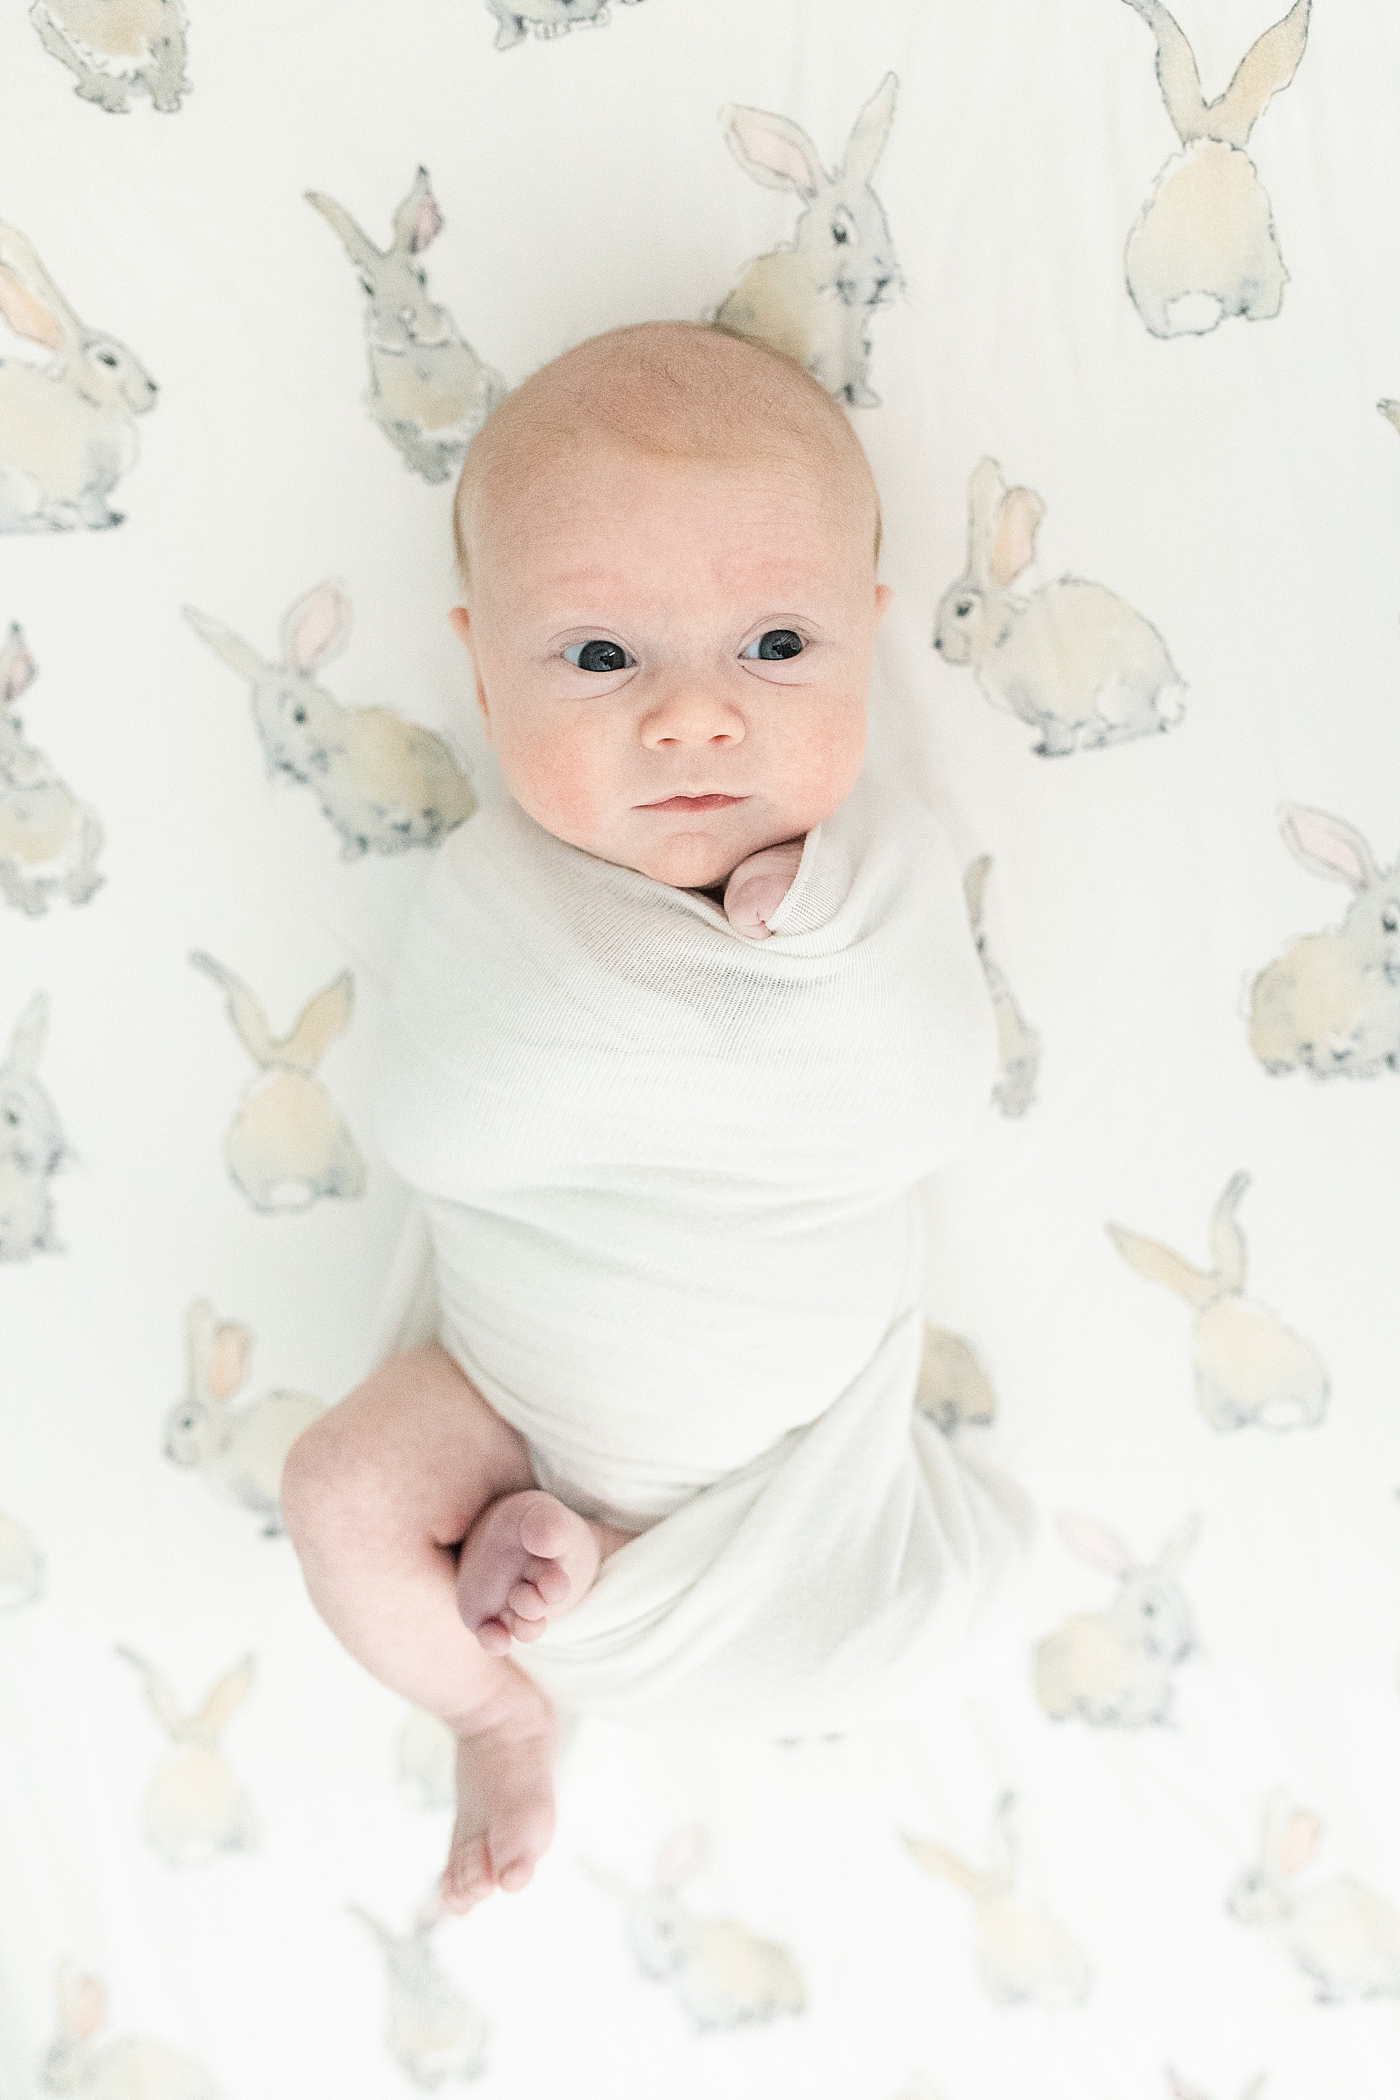 Baby wrapped in swaddle on bunny sheets | Photo by Little Sunshine Photography